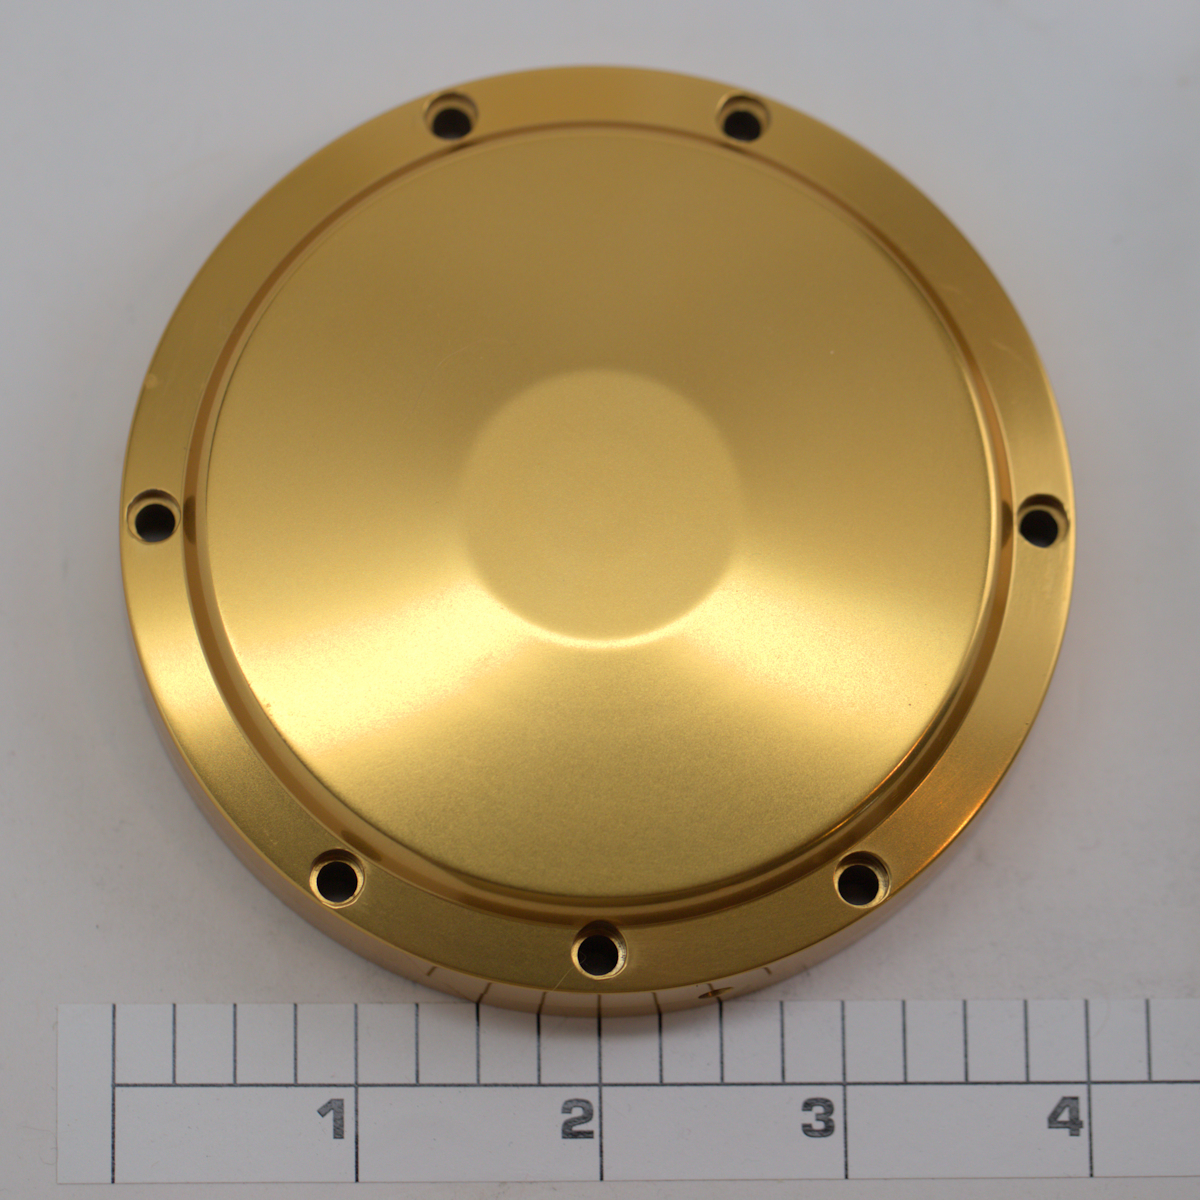 27-20 Plate, Non-Handle Side Plate